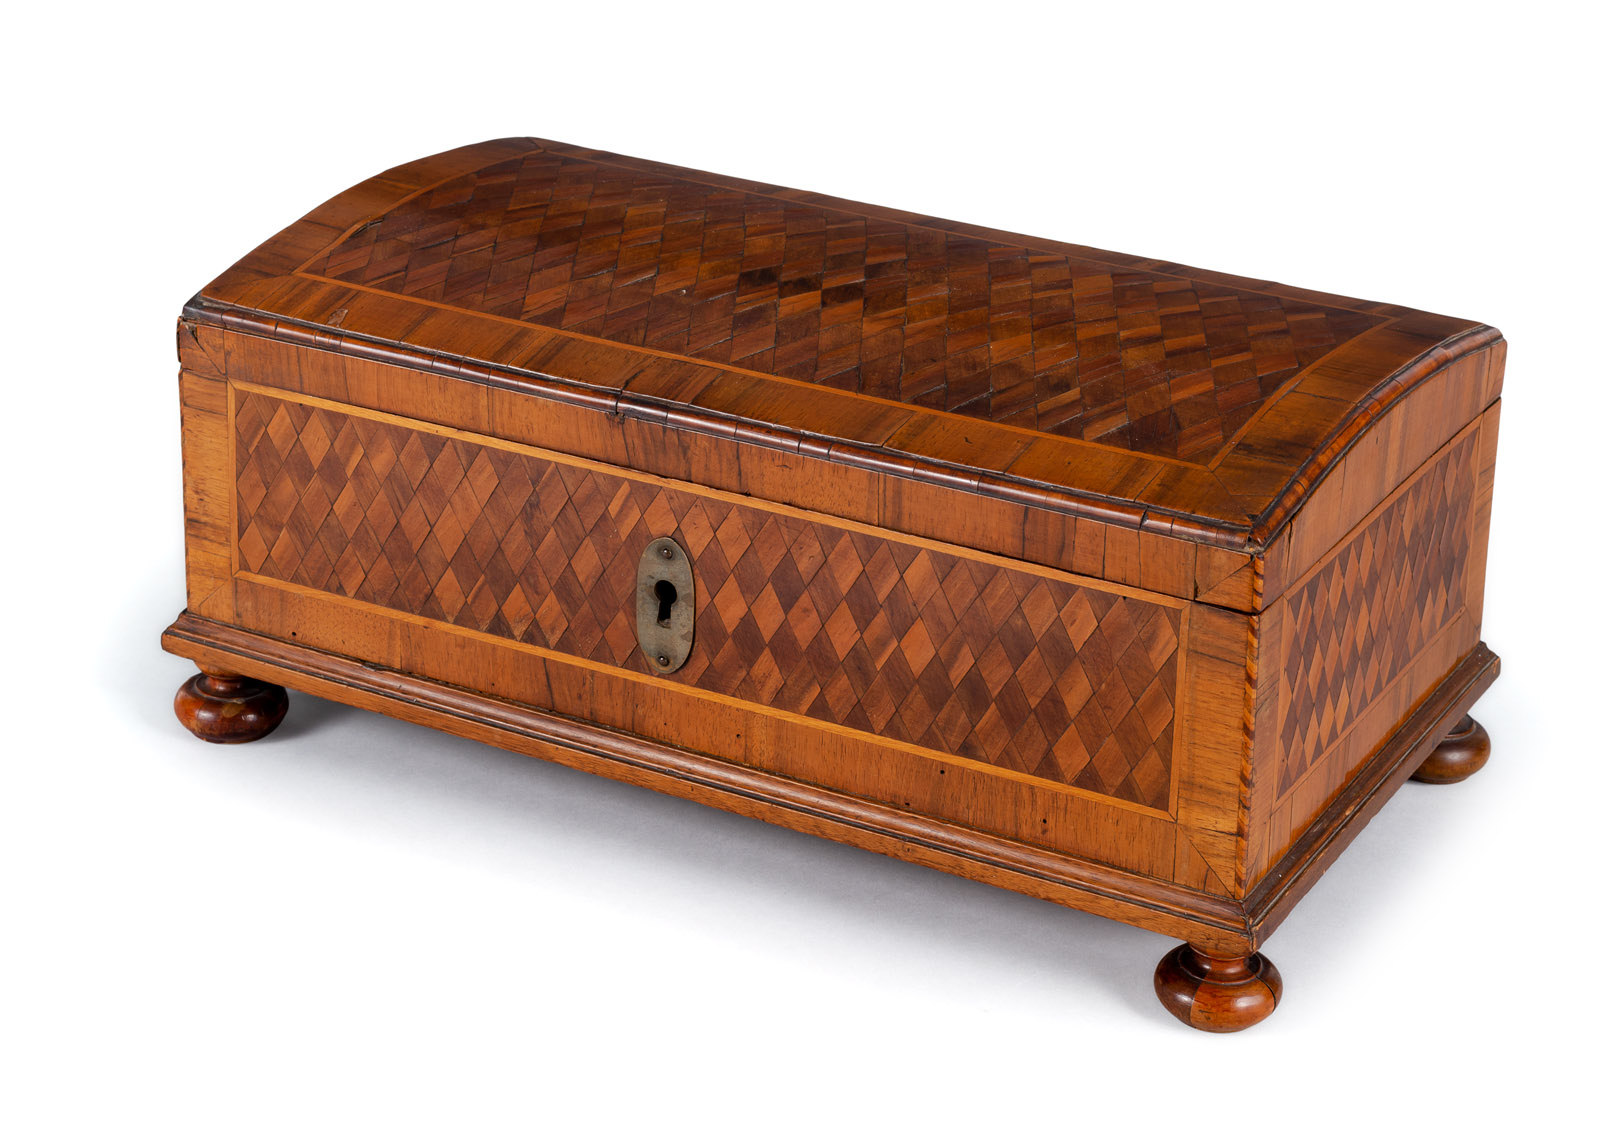 A FINE CASKET WITH RHOMBUS MARQUETRY